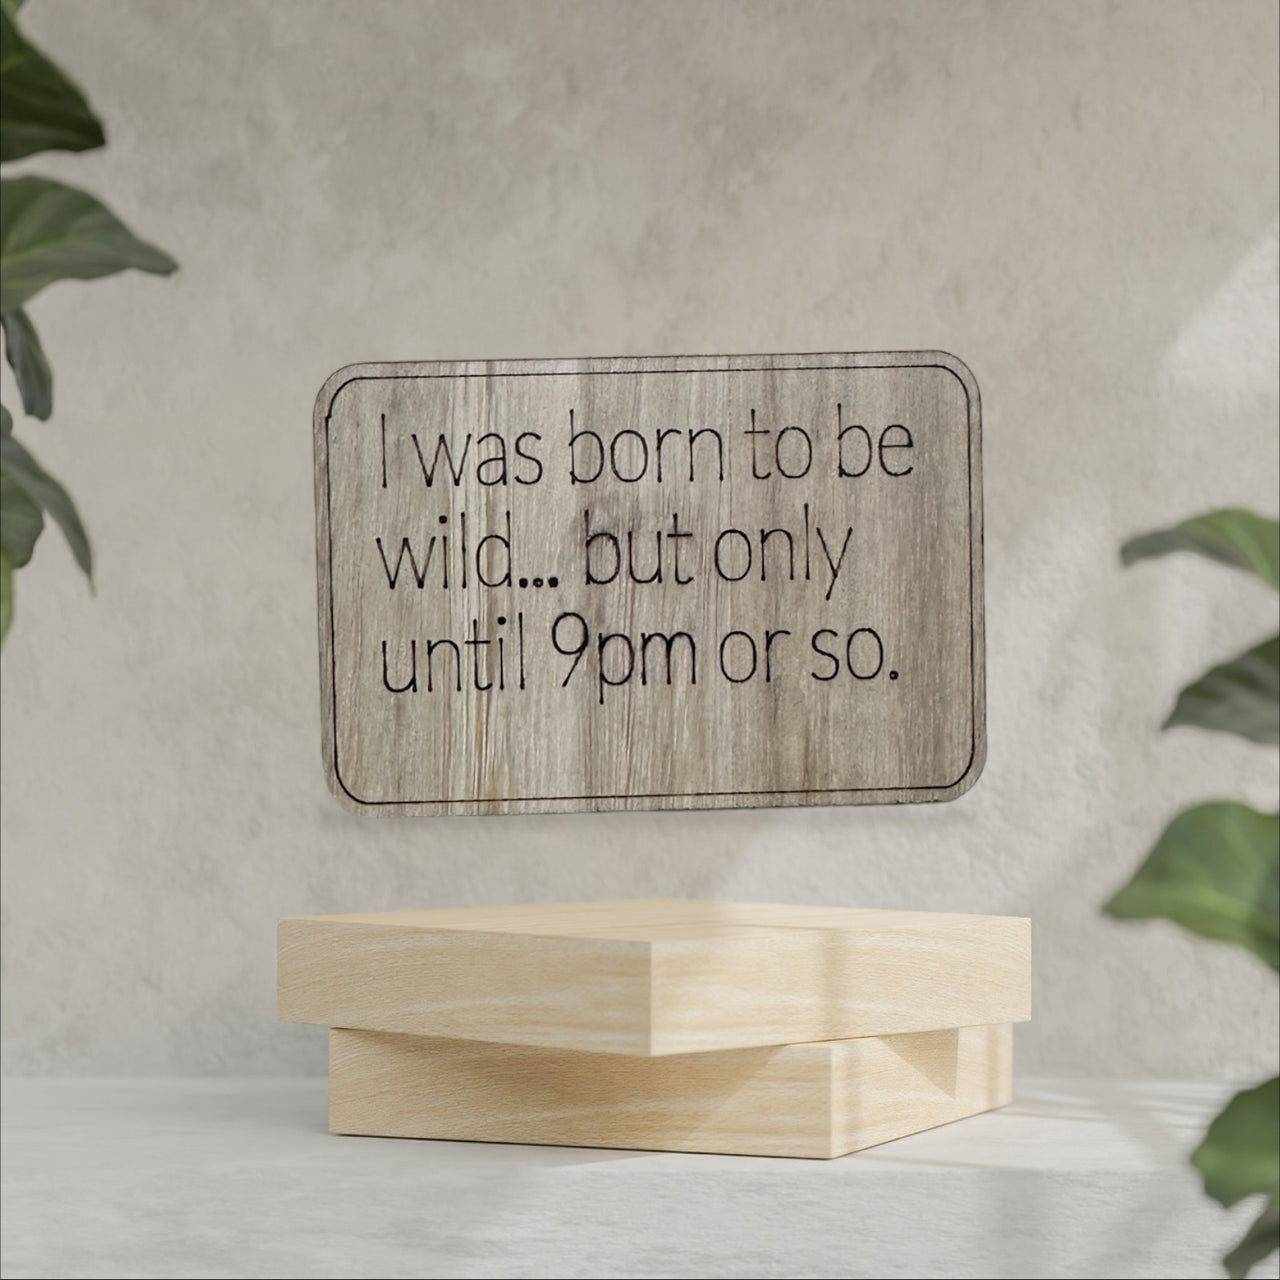 Wooden Sarcastic Fridge Magnet - I was born to be